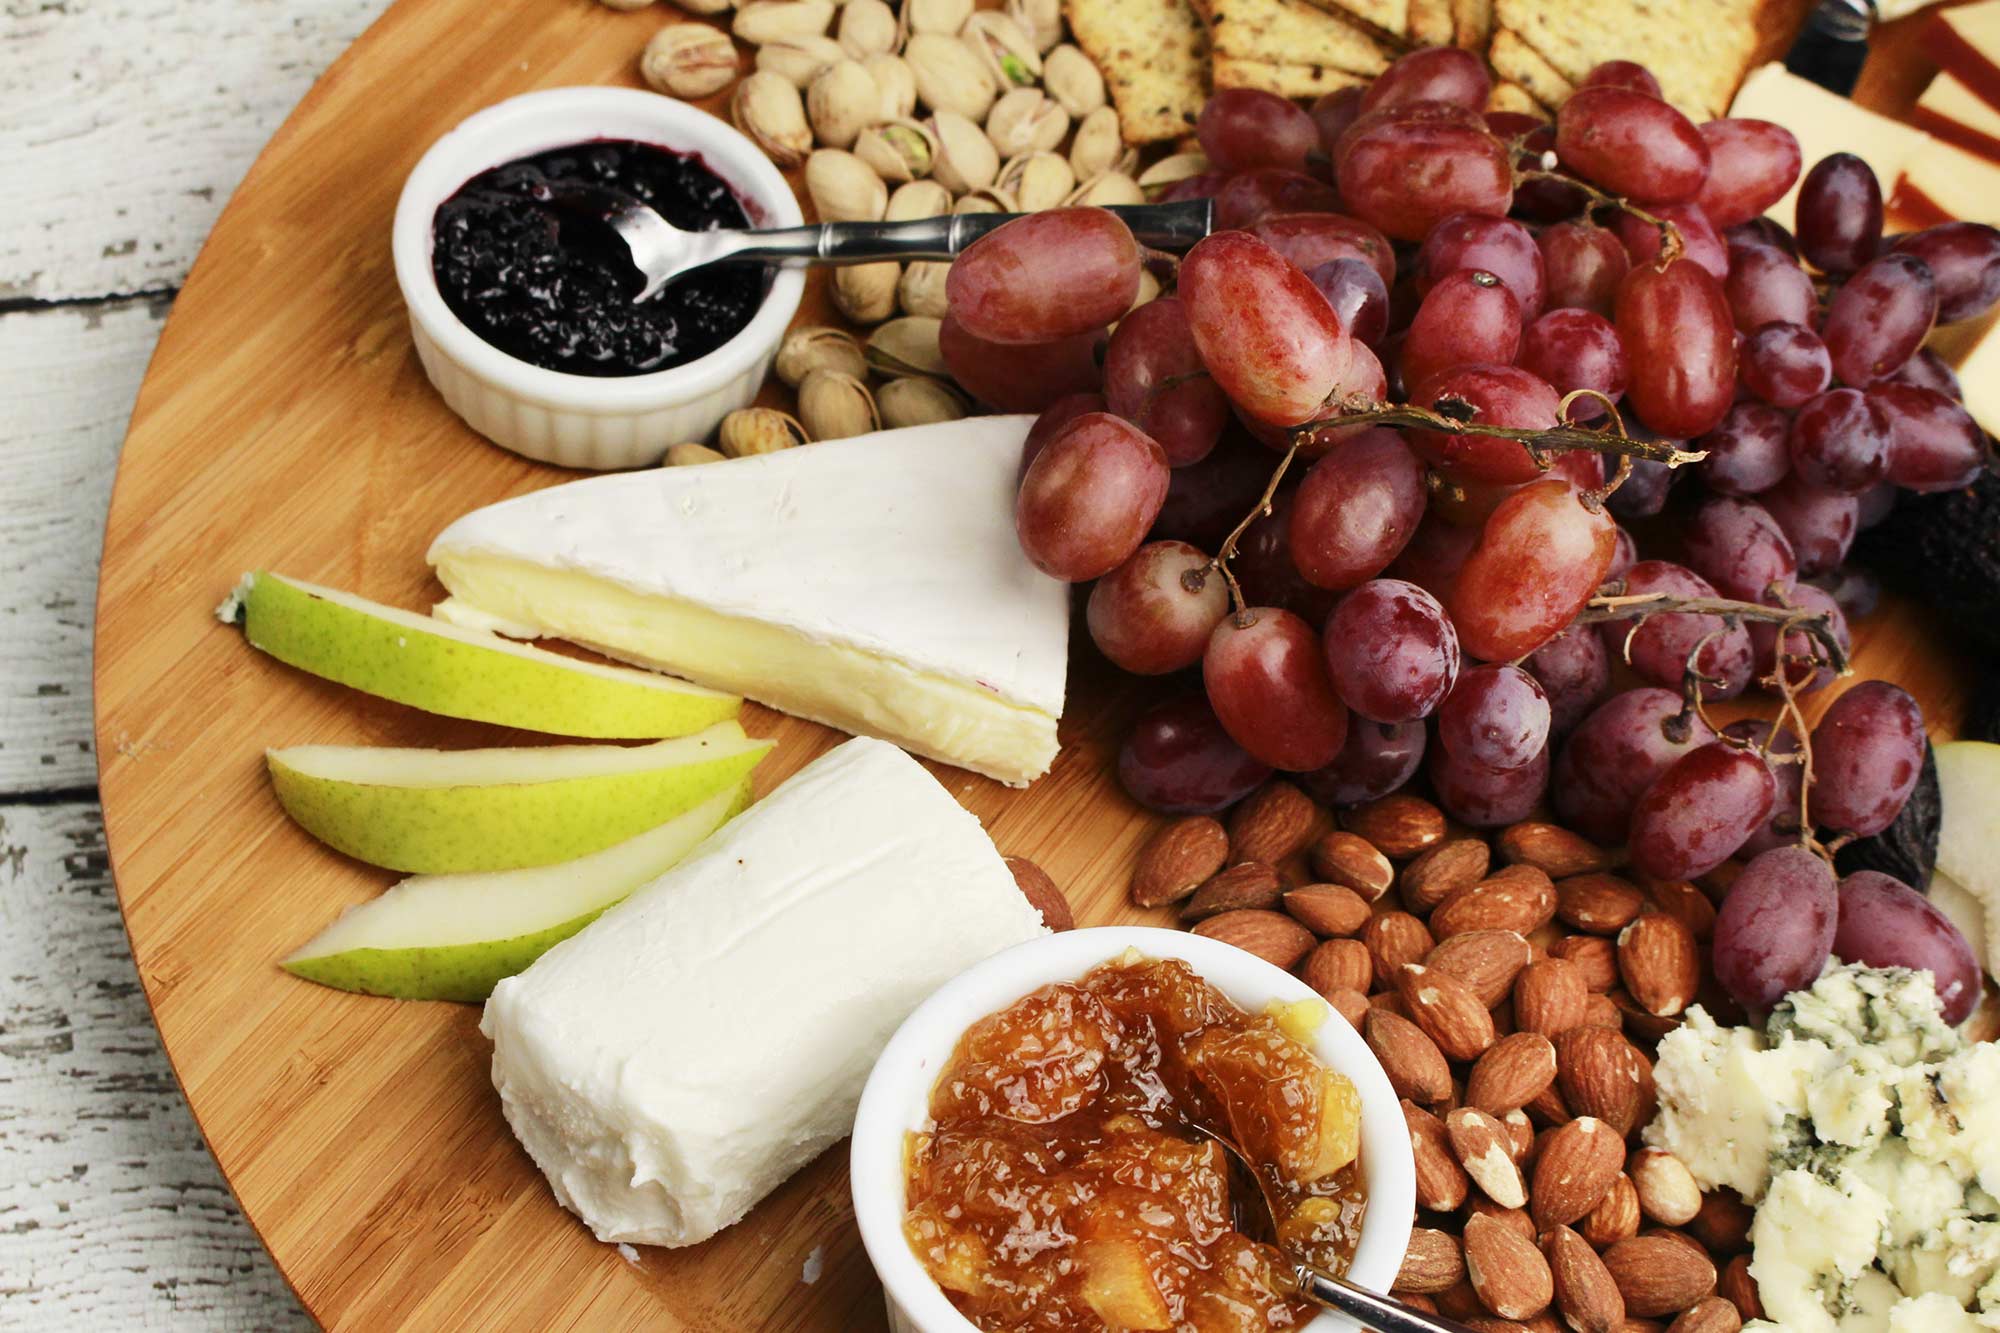 Farm Fresh Preserves, Cheese and Nut Plate